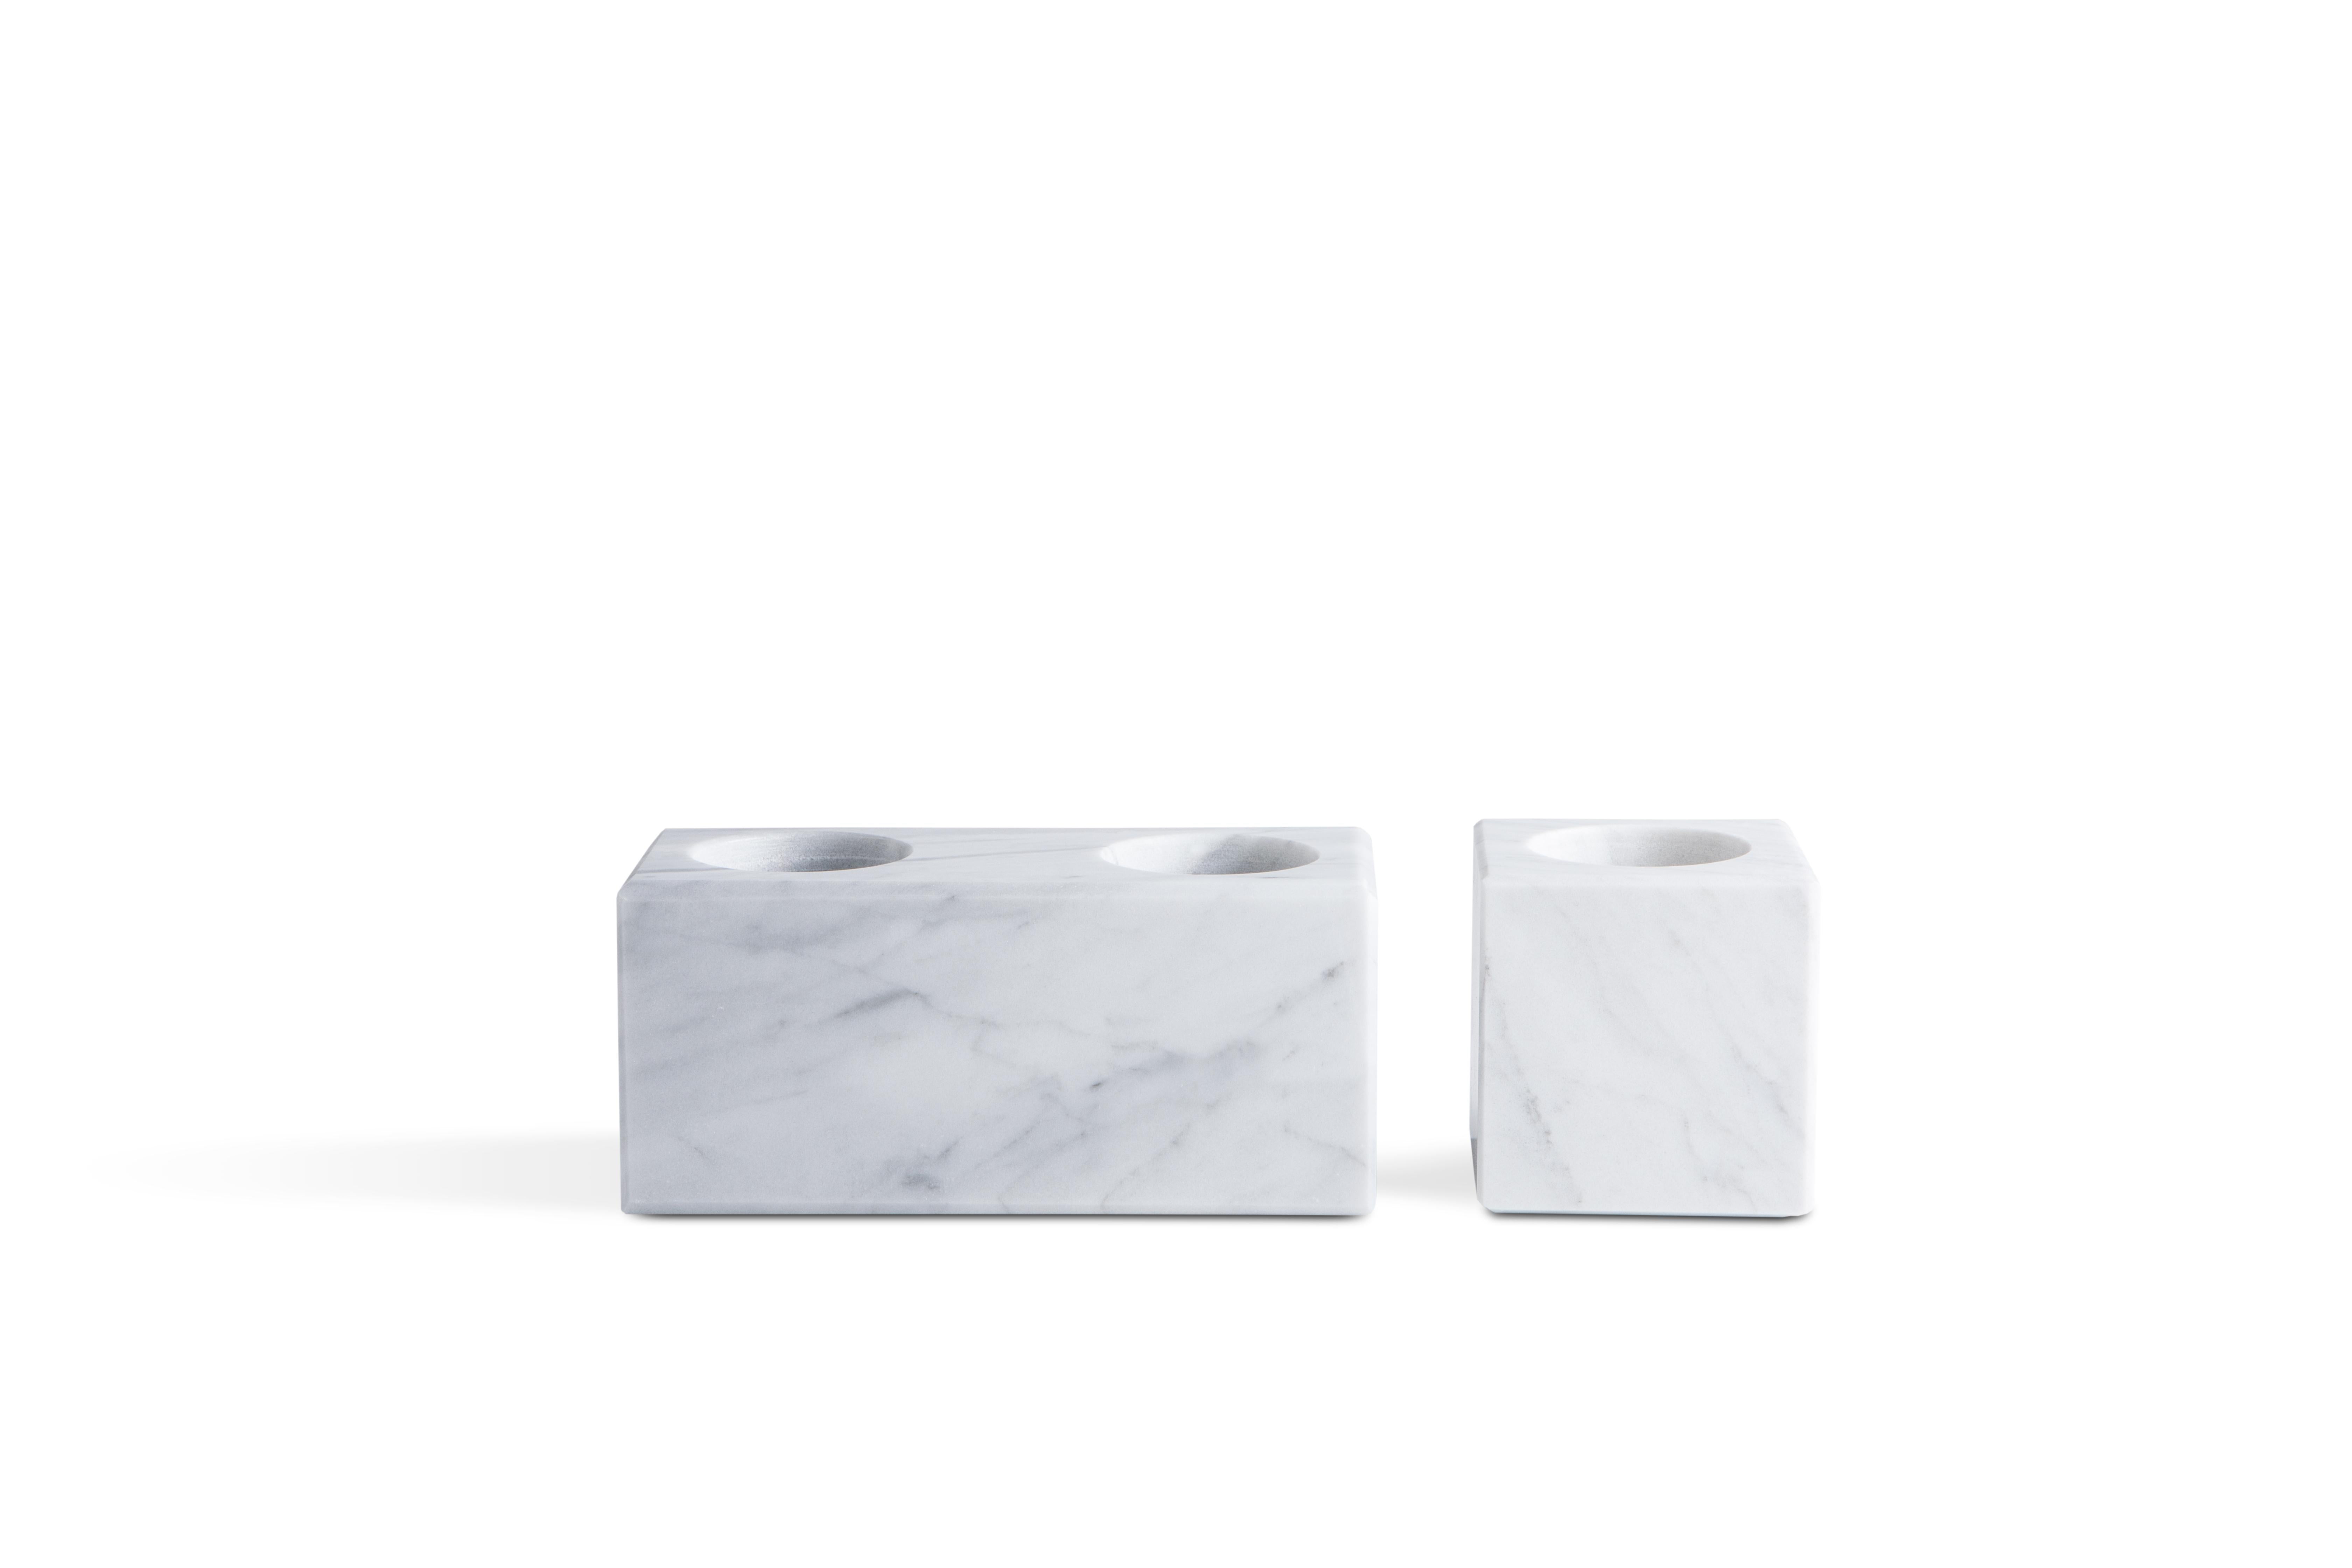 Squared double candleholder in white Carrara marble. 

Each piece is in a way unique (since each marble block is different in veins and shades) and handcrafted in Italy. Slight variations in shape, color and size are to be considered a guarantee